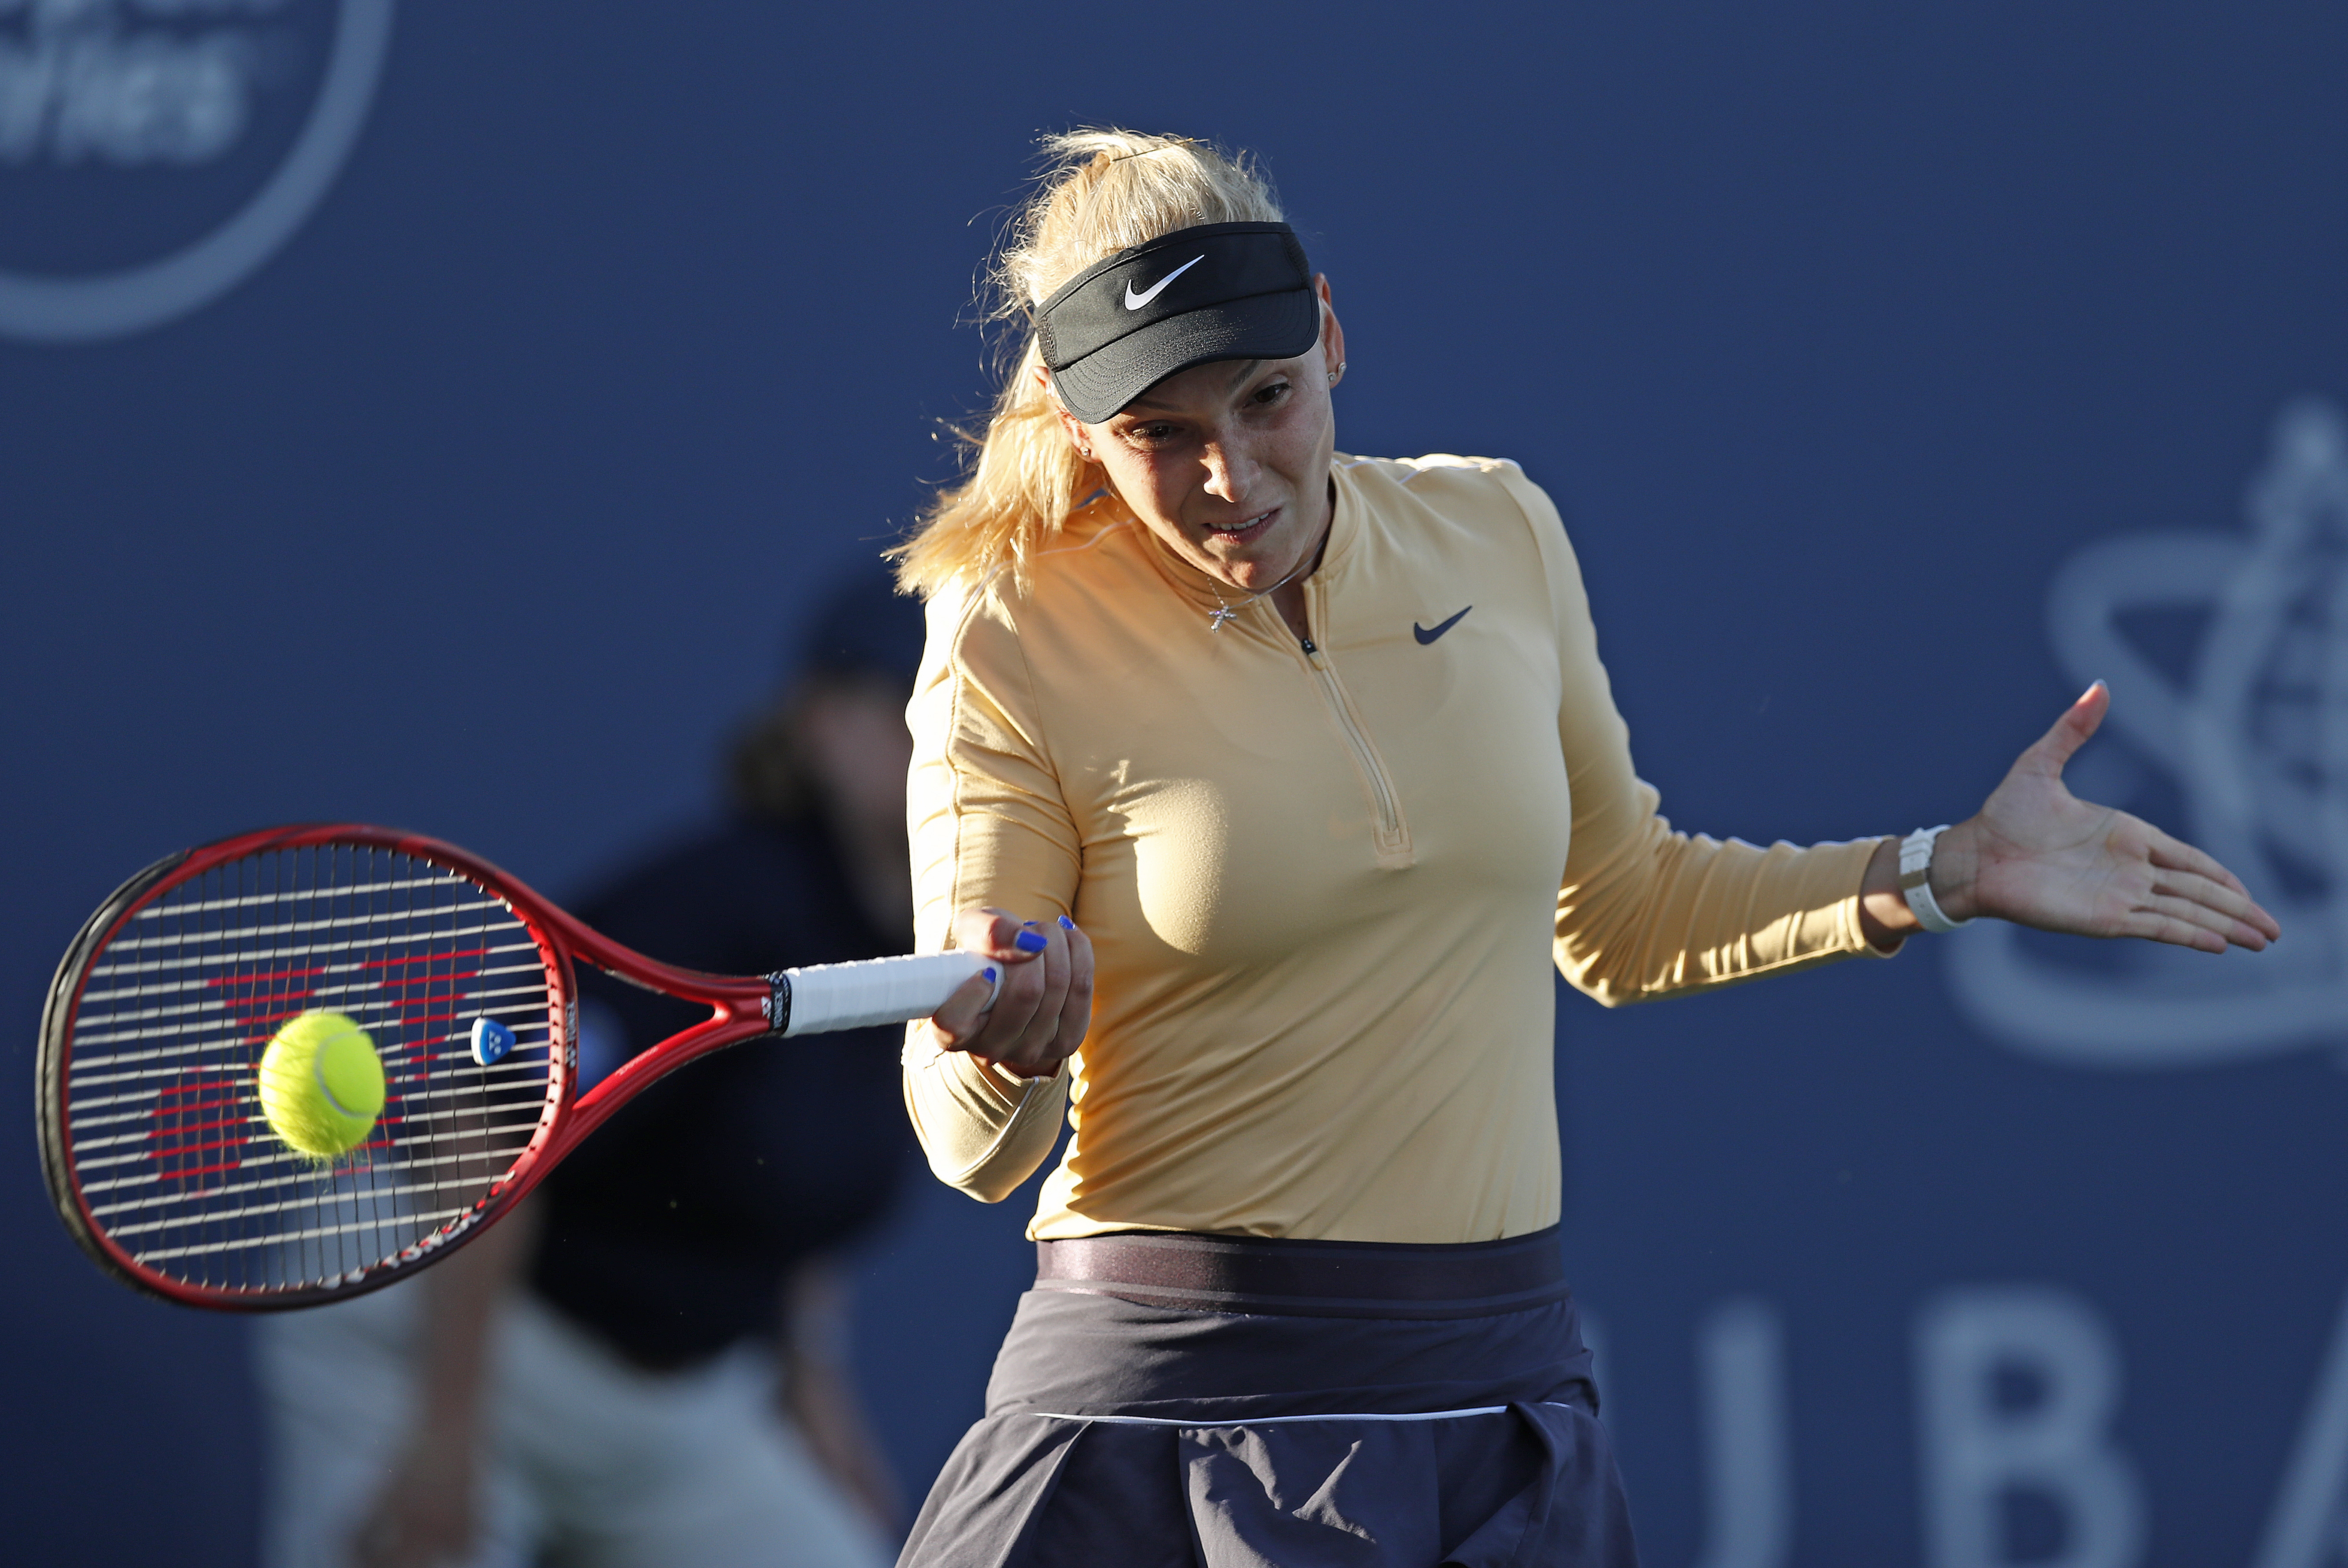 epa07755678 Donna Vekic of Croatia in action against Aryna Sabalenka of Belarus during a women's semifinal match at the Silicon Valley Classic tennis tournament in San Jose, California, USA, 03 August 2019.  EPA/JOHN G. MABANGLO